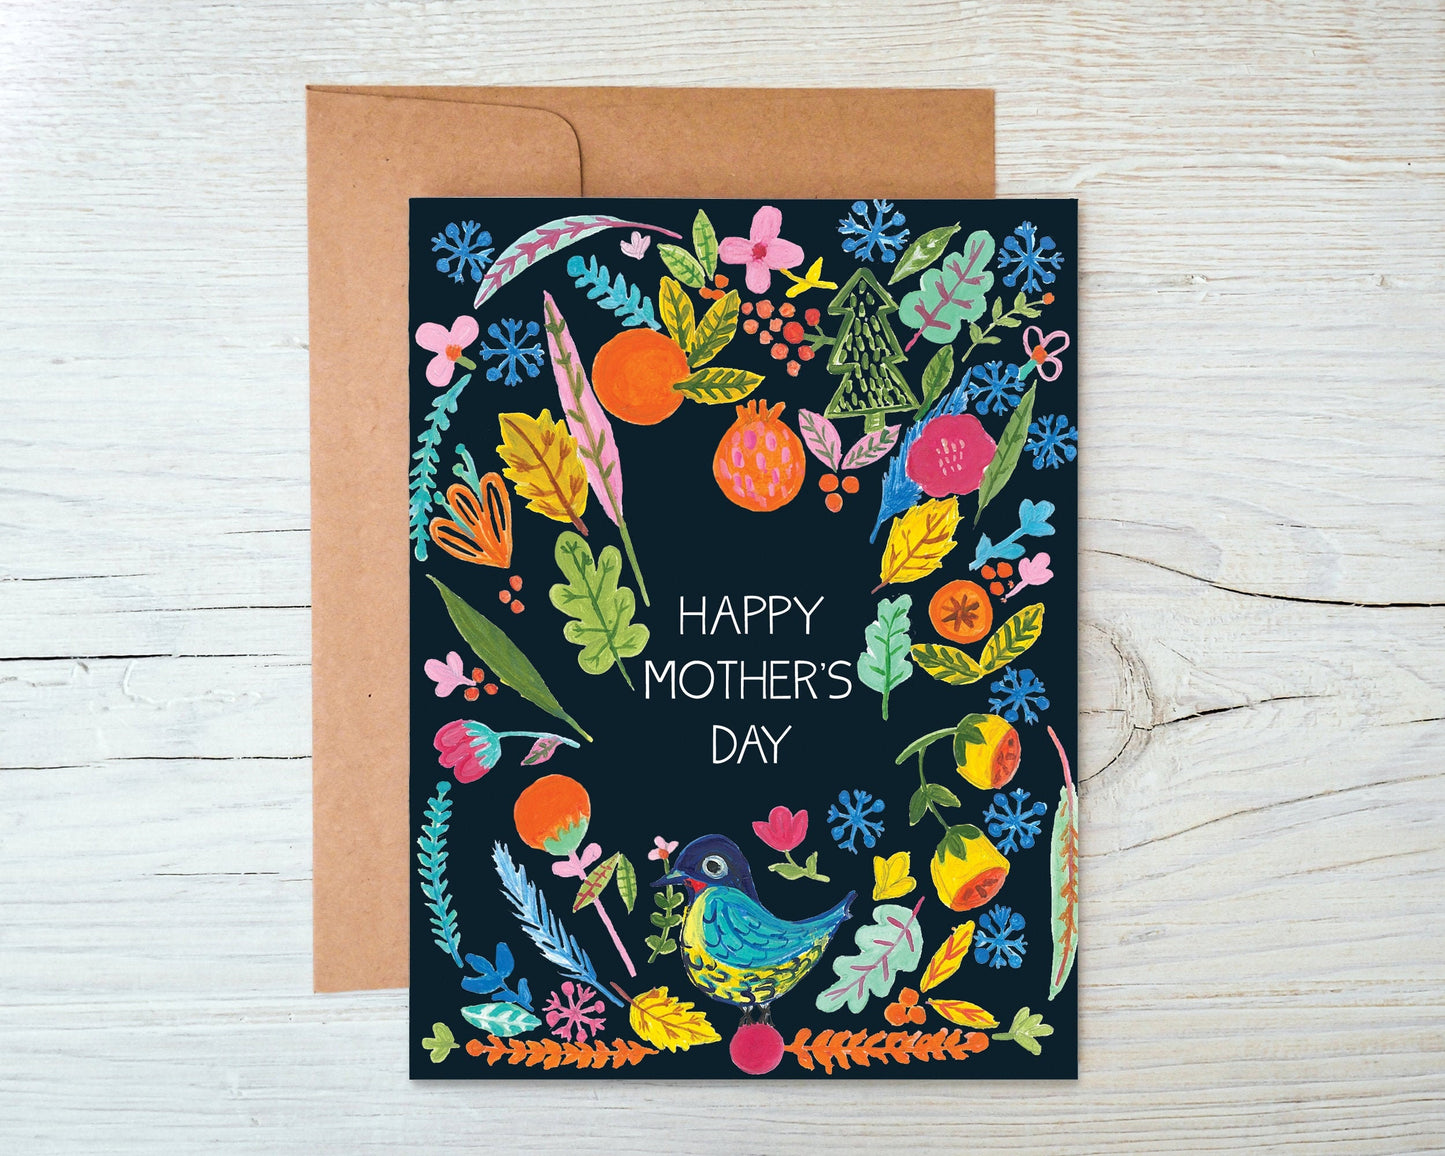 Mothers Day Cards, Happy Mother's Day Card, Floral Botanical Card, Mum Card, Card for Mom, Card from Daughter, Item Code - COTC M01